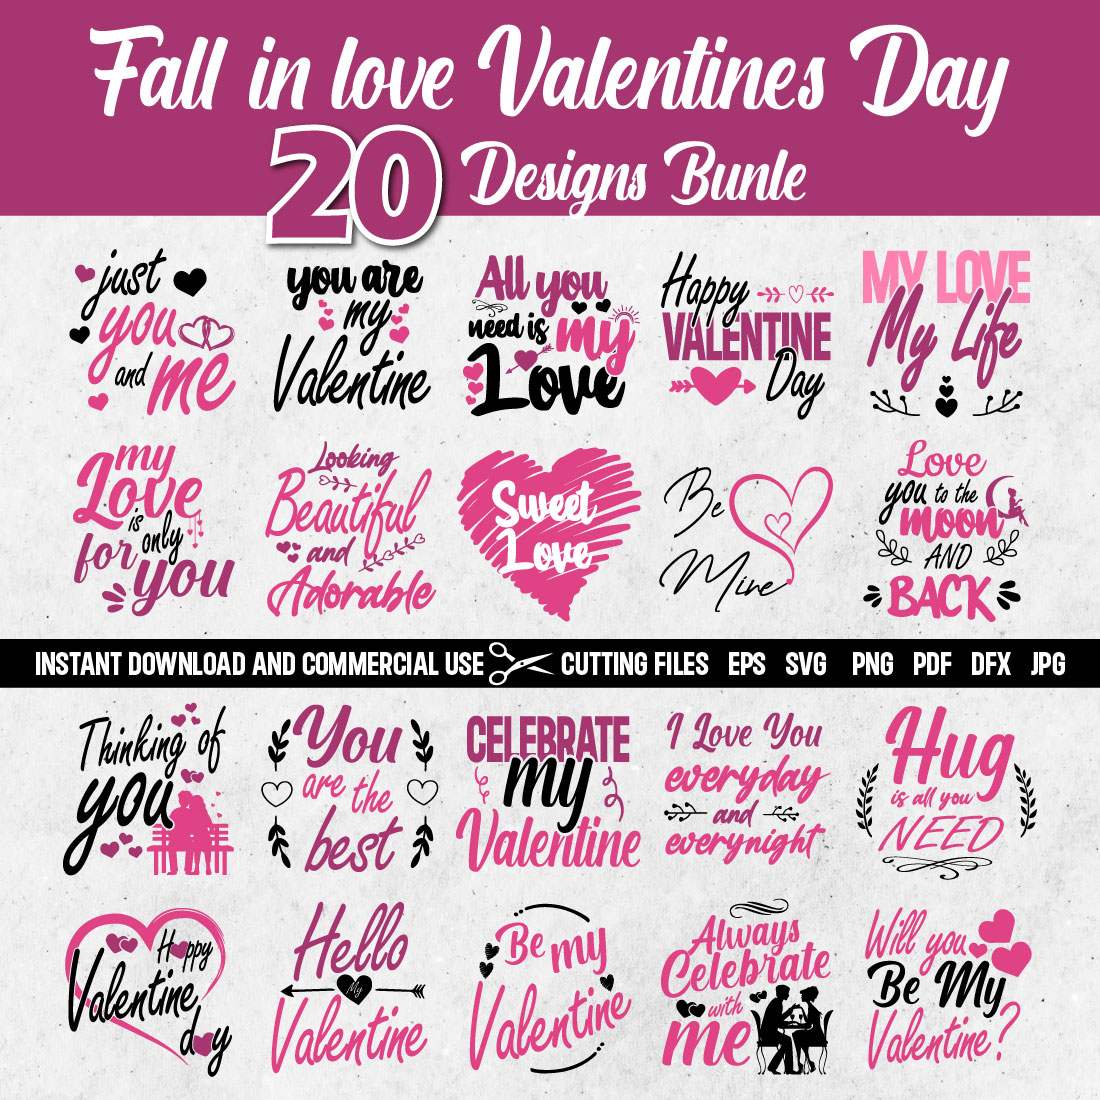 Valentine's Day Fall in Love Colorful Bundle Designs cover image.